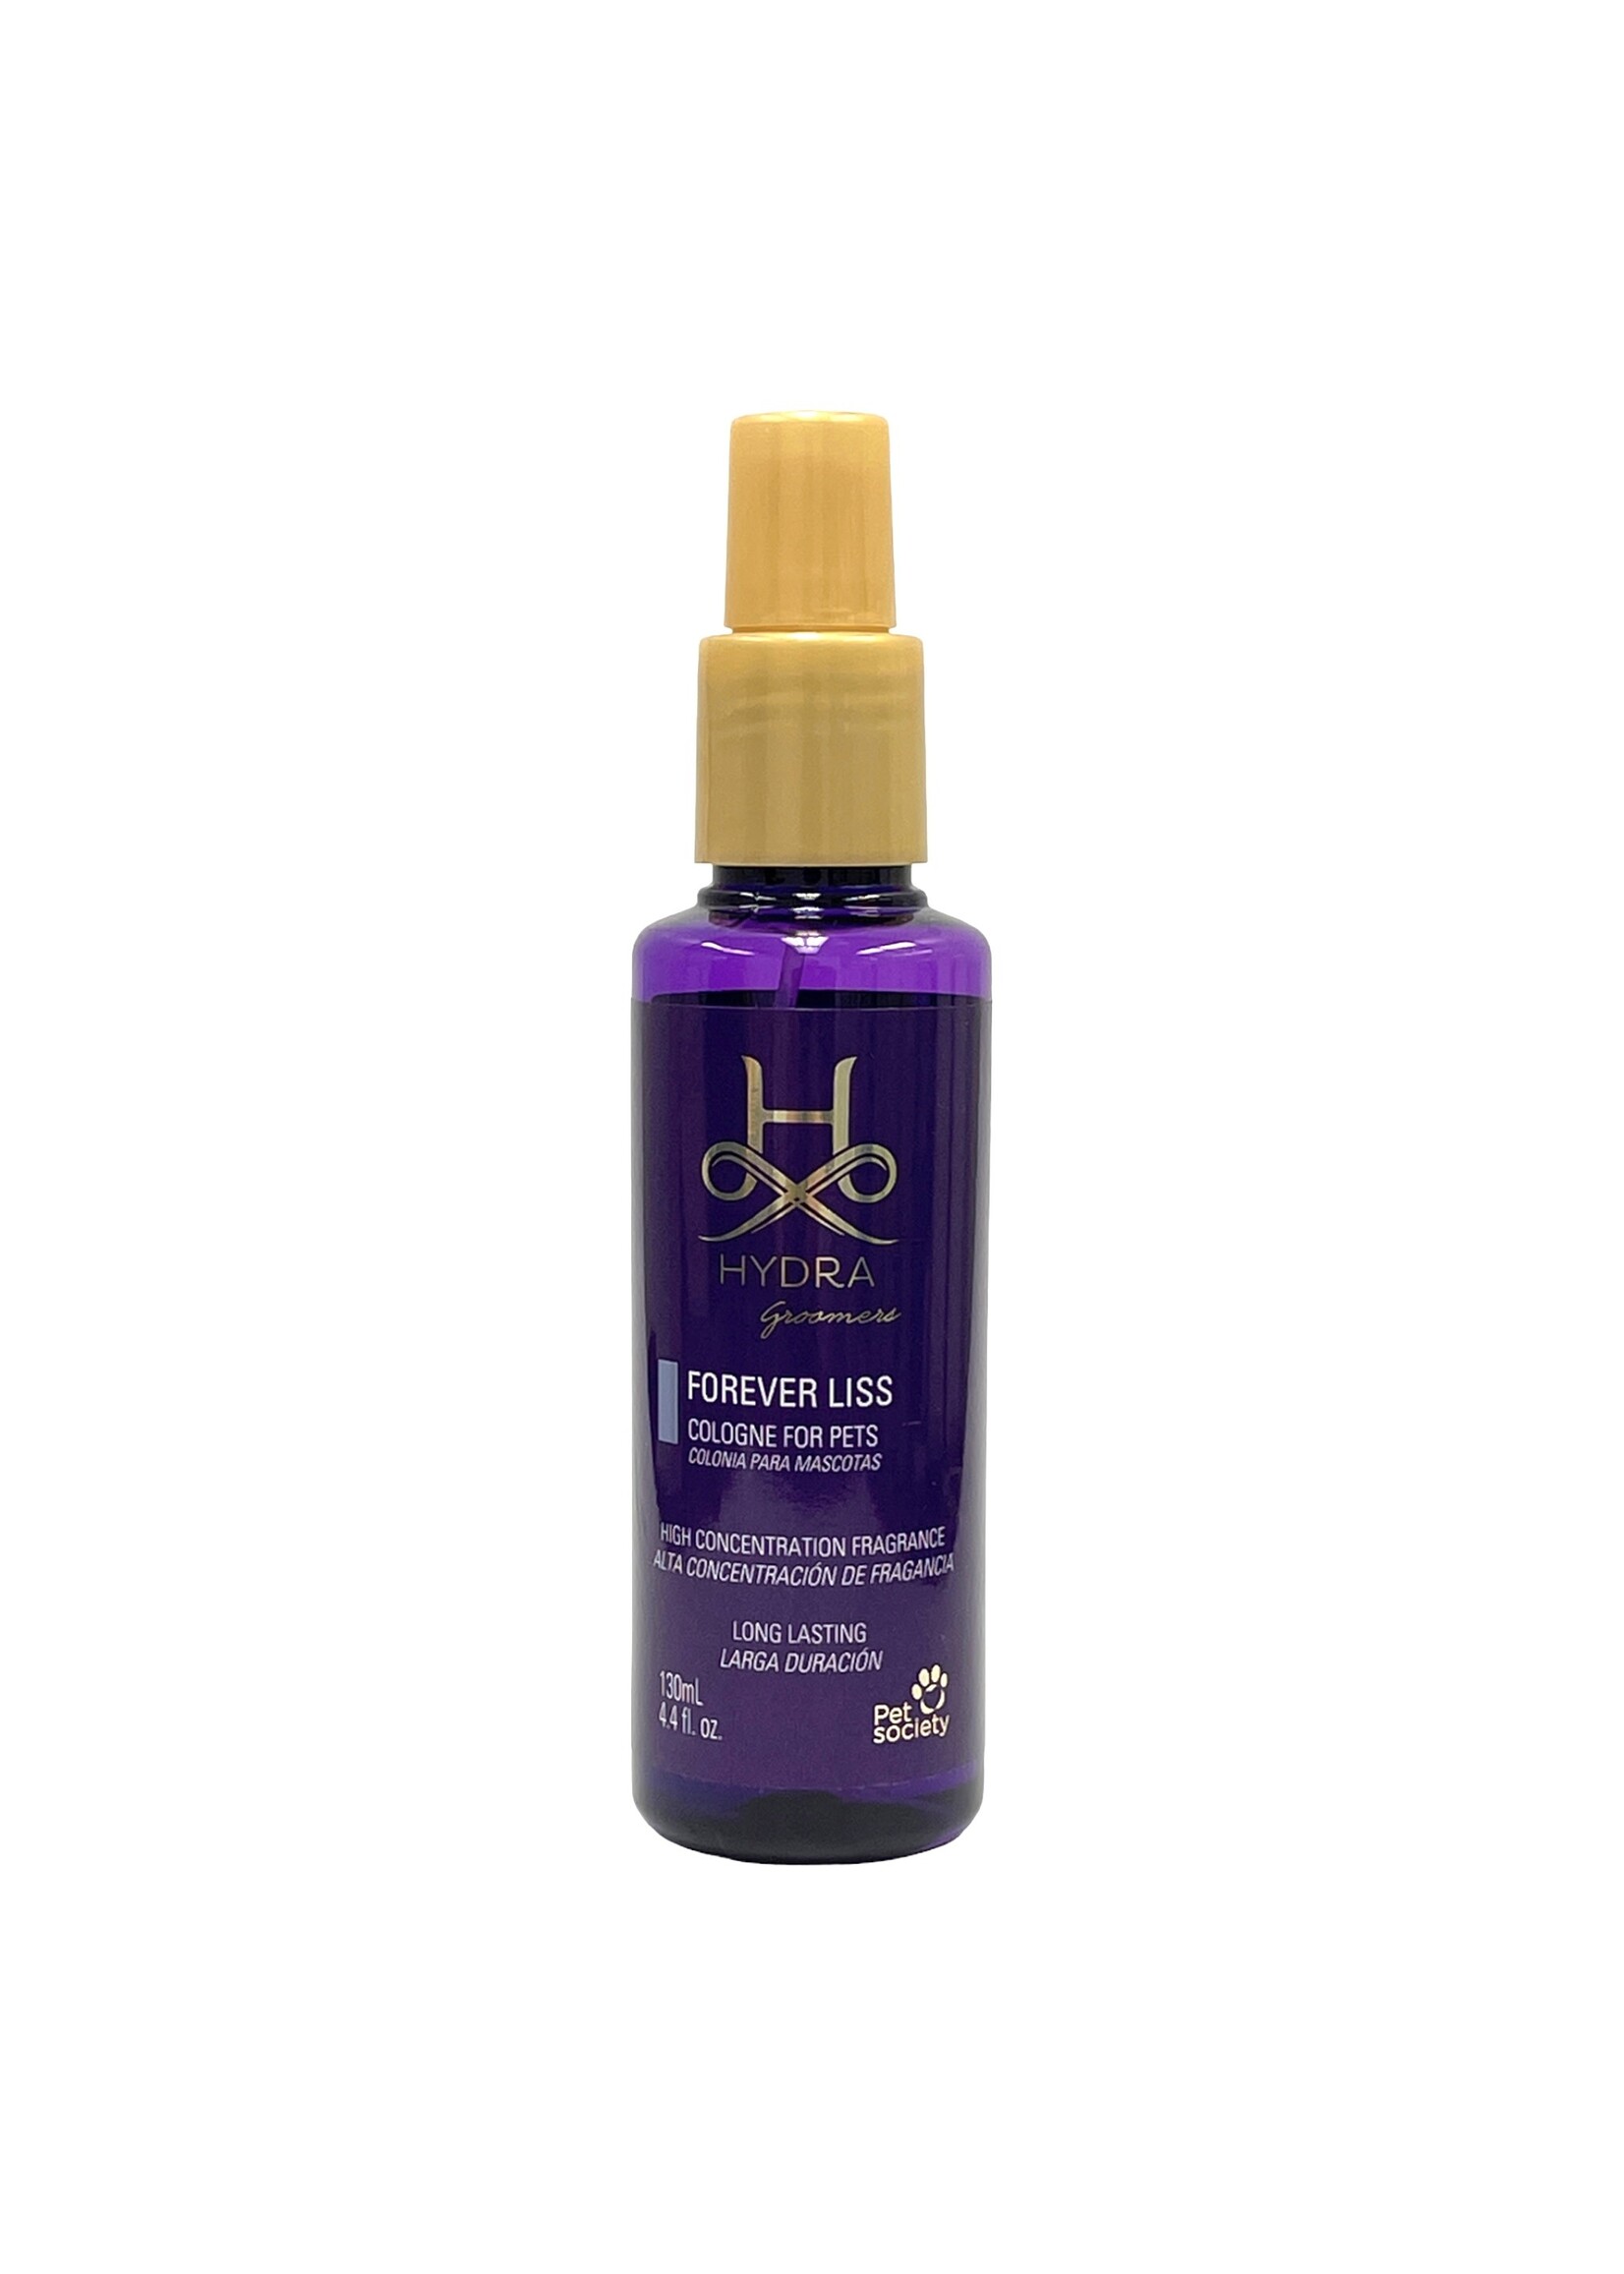 Hydra Hydra Forever Liss Cologne 4.4oz